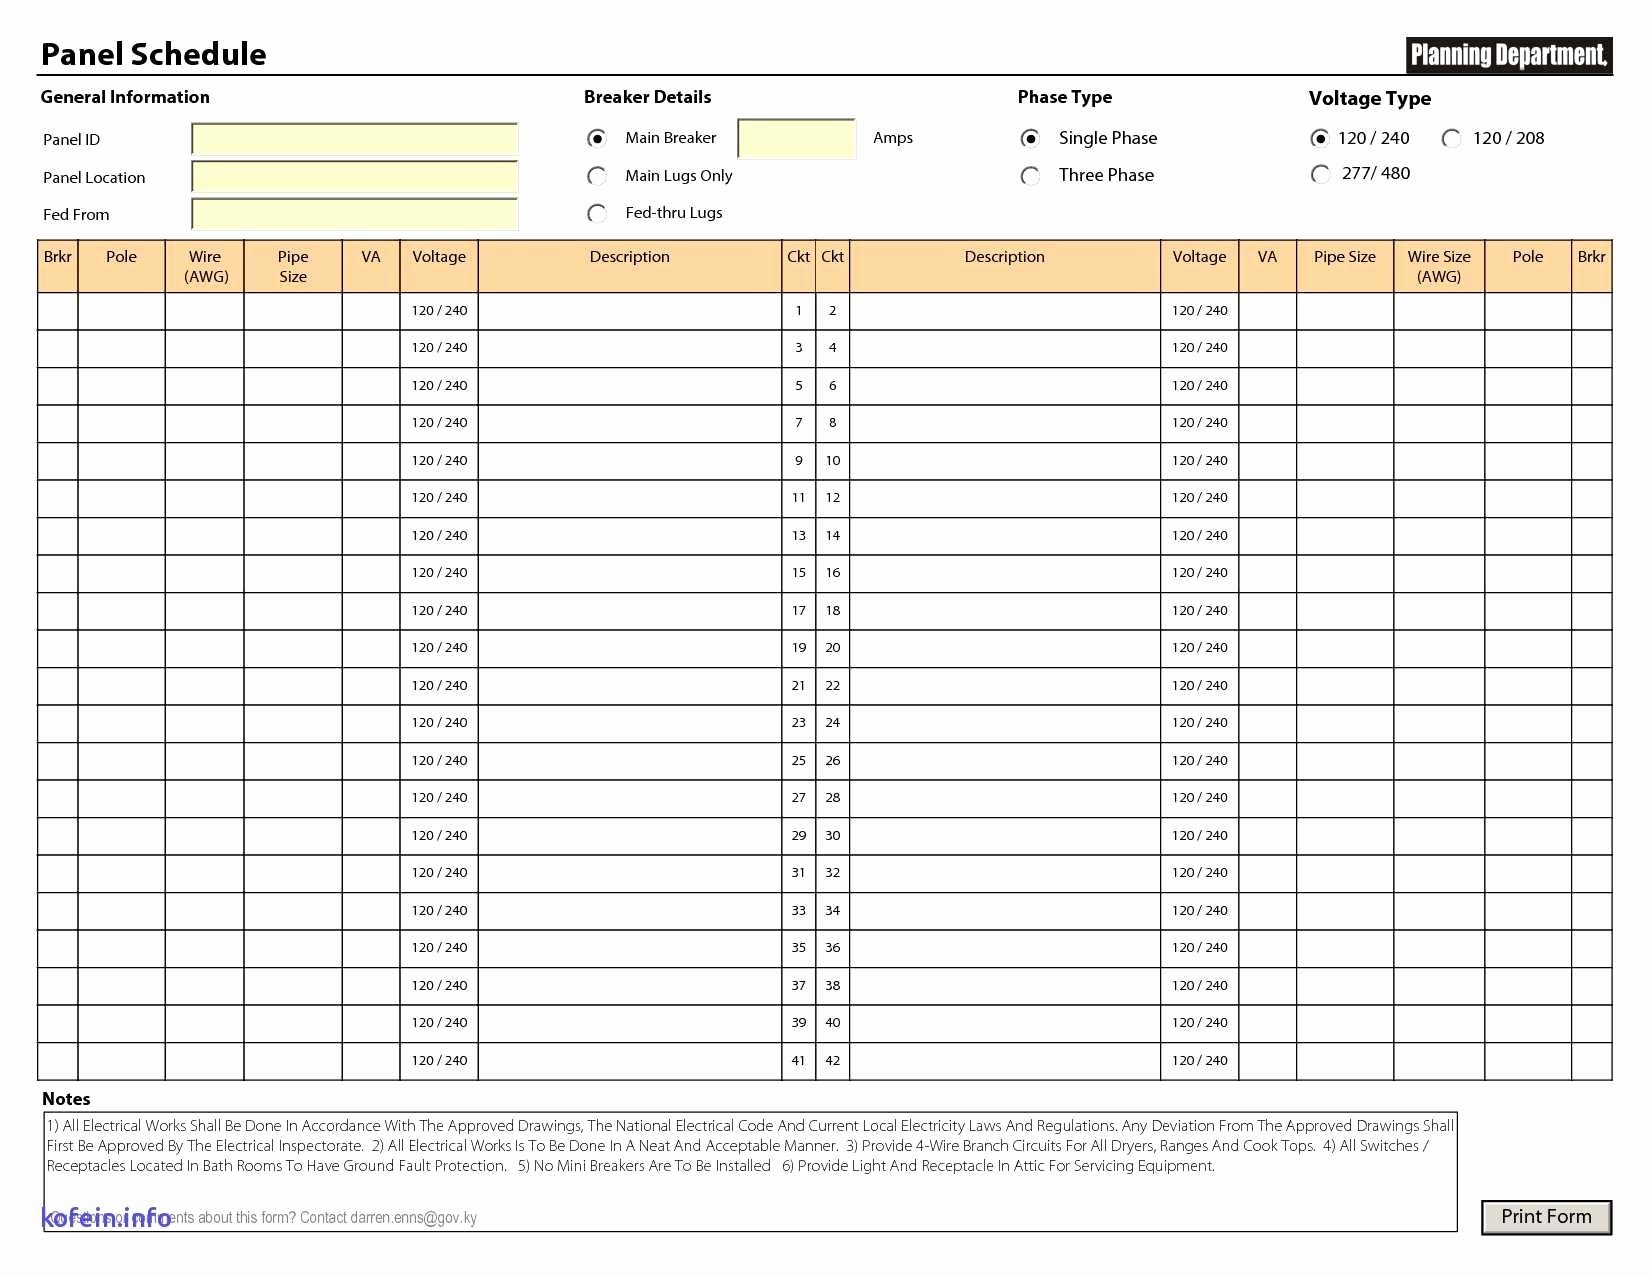 Electrical Panel Schedule Template Luxury Electrical Panel Schedule Template Excel